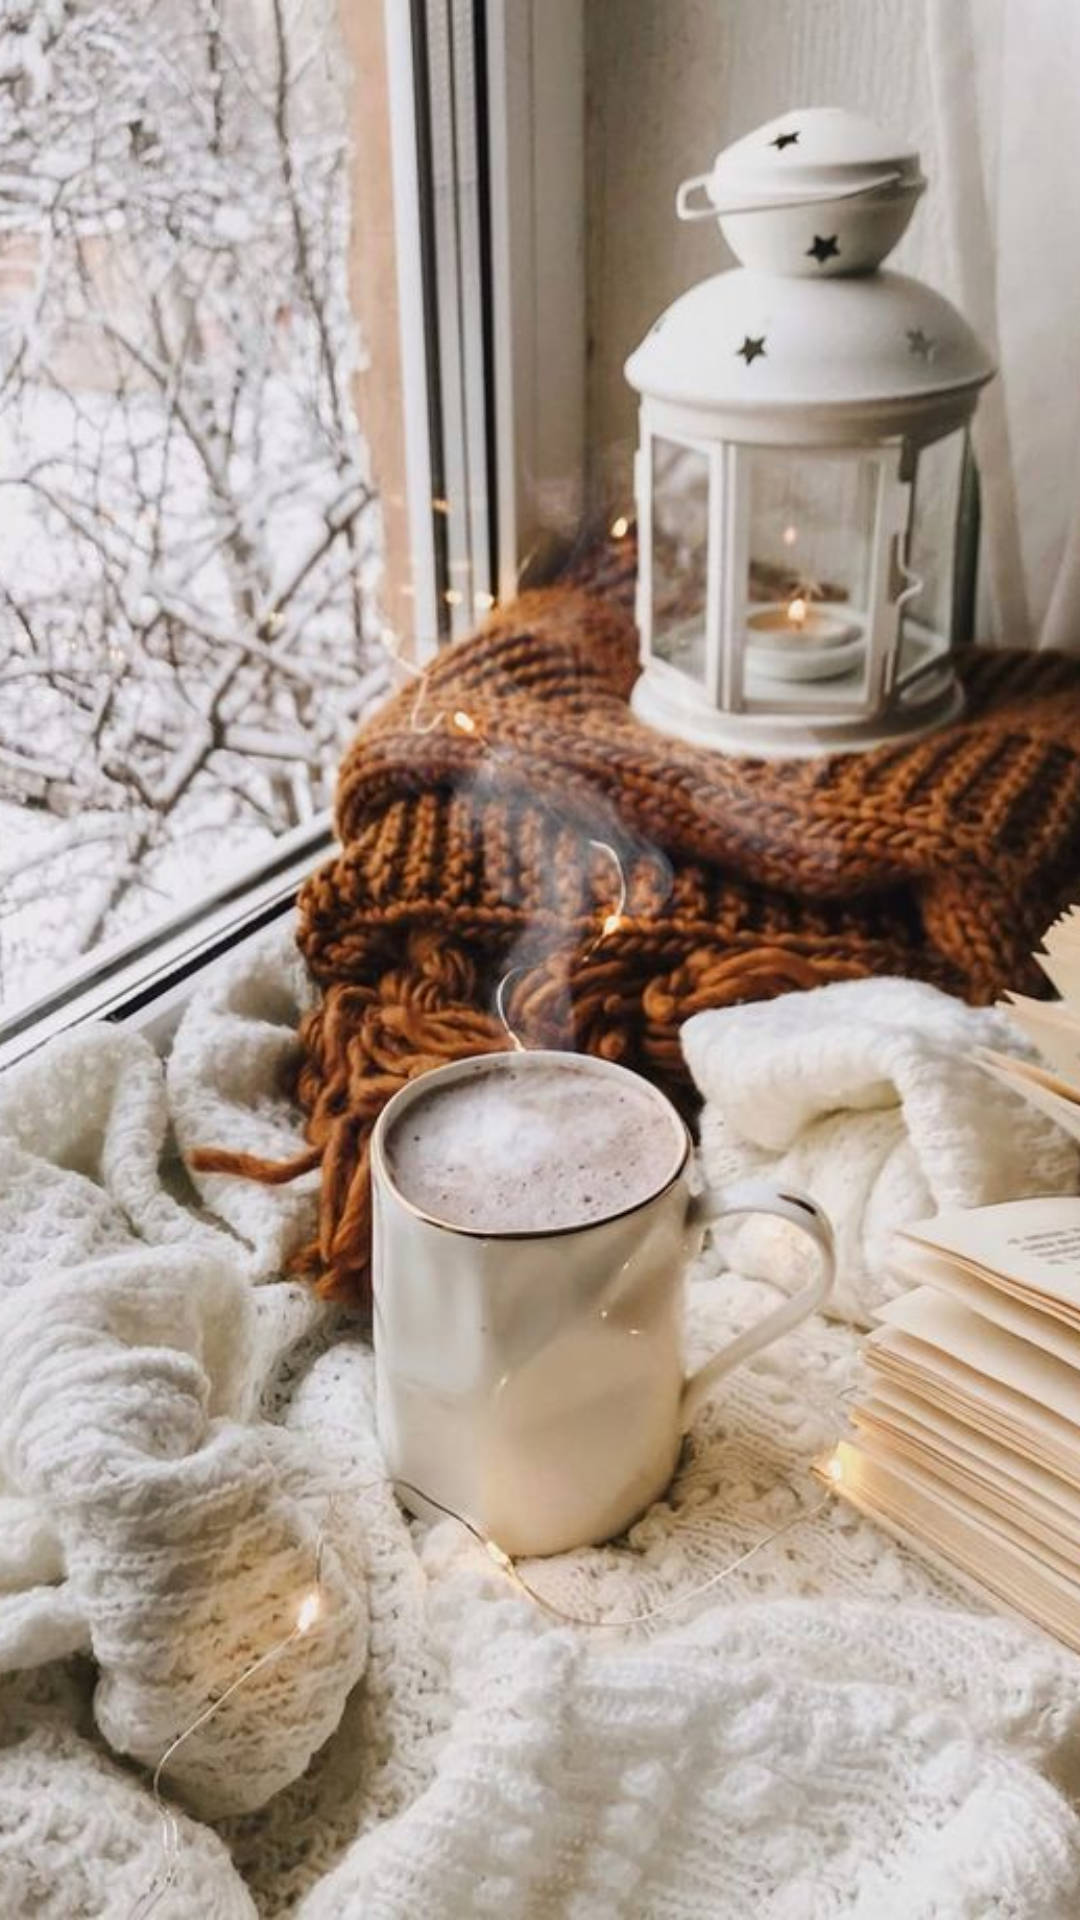 A cozy winter scene with a cup of hot chocolate, a book, and a window. - Cozy